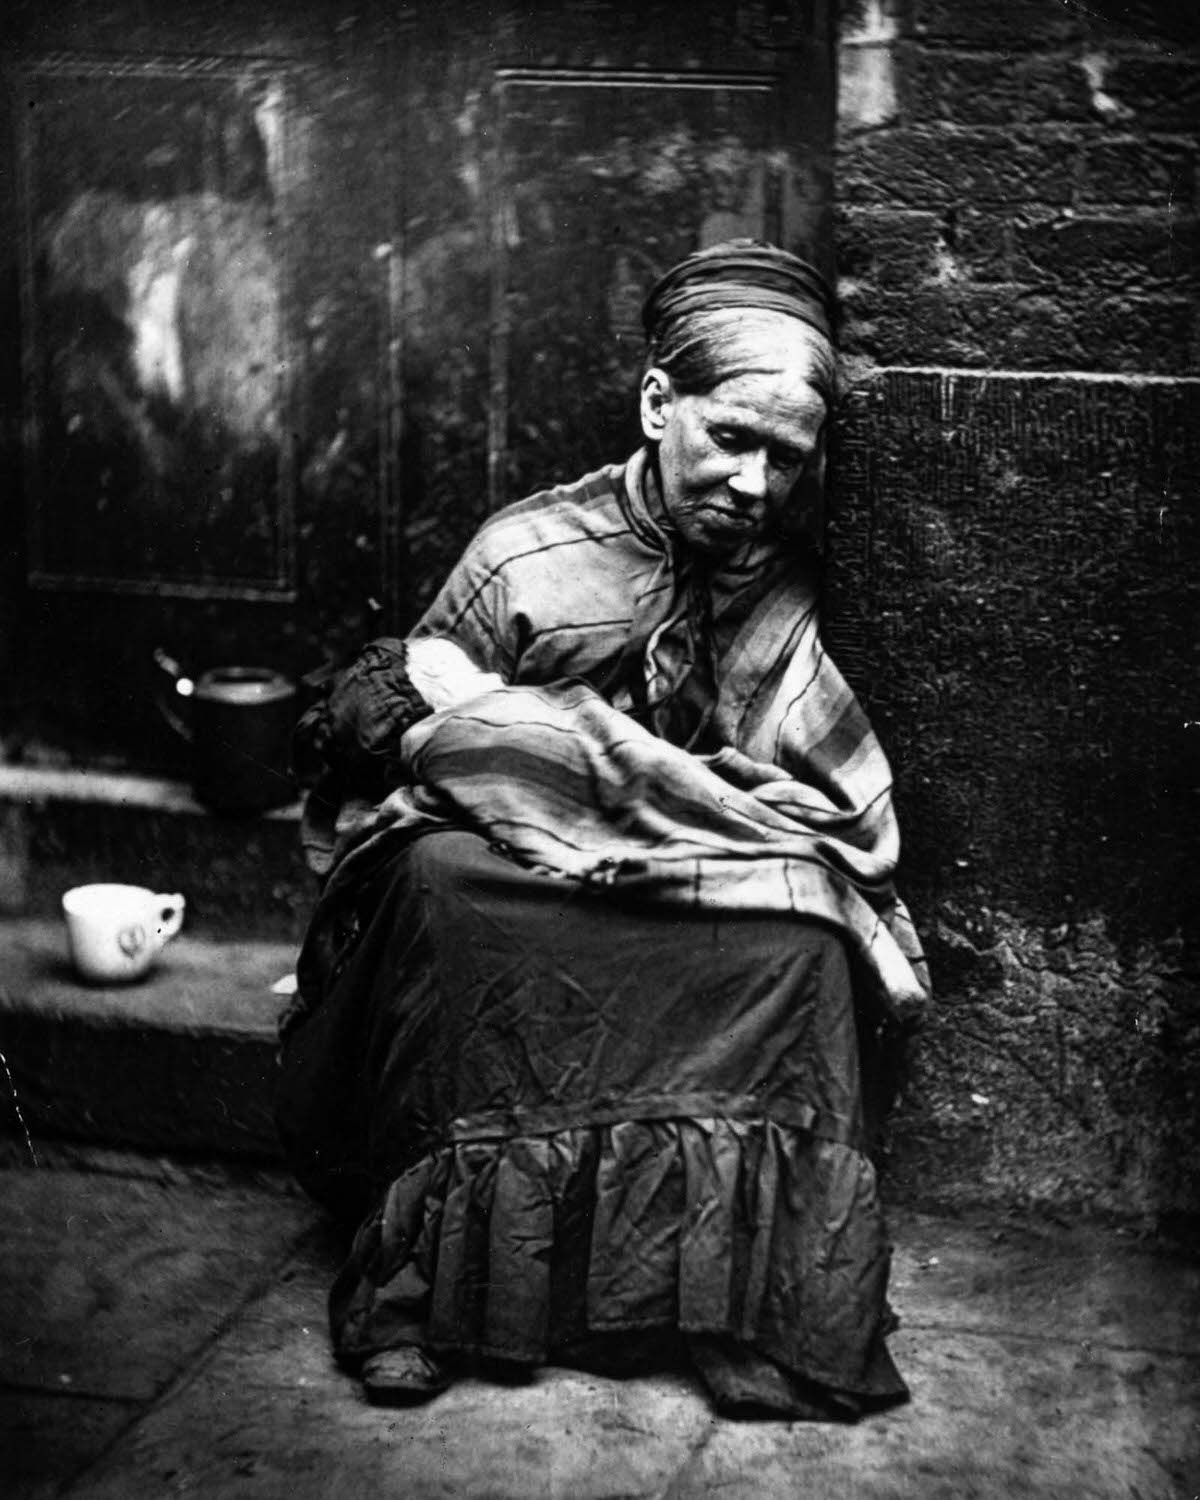 A beggar paid to look after a baby, 1877.